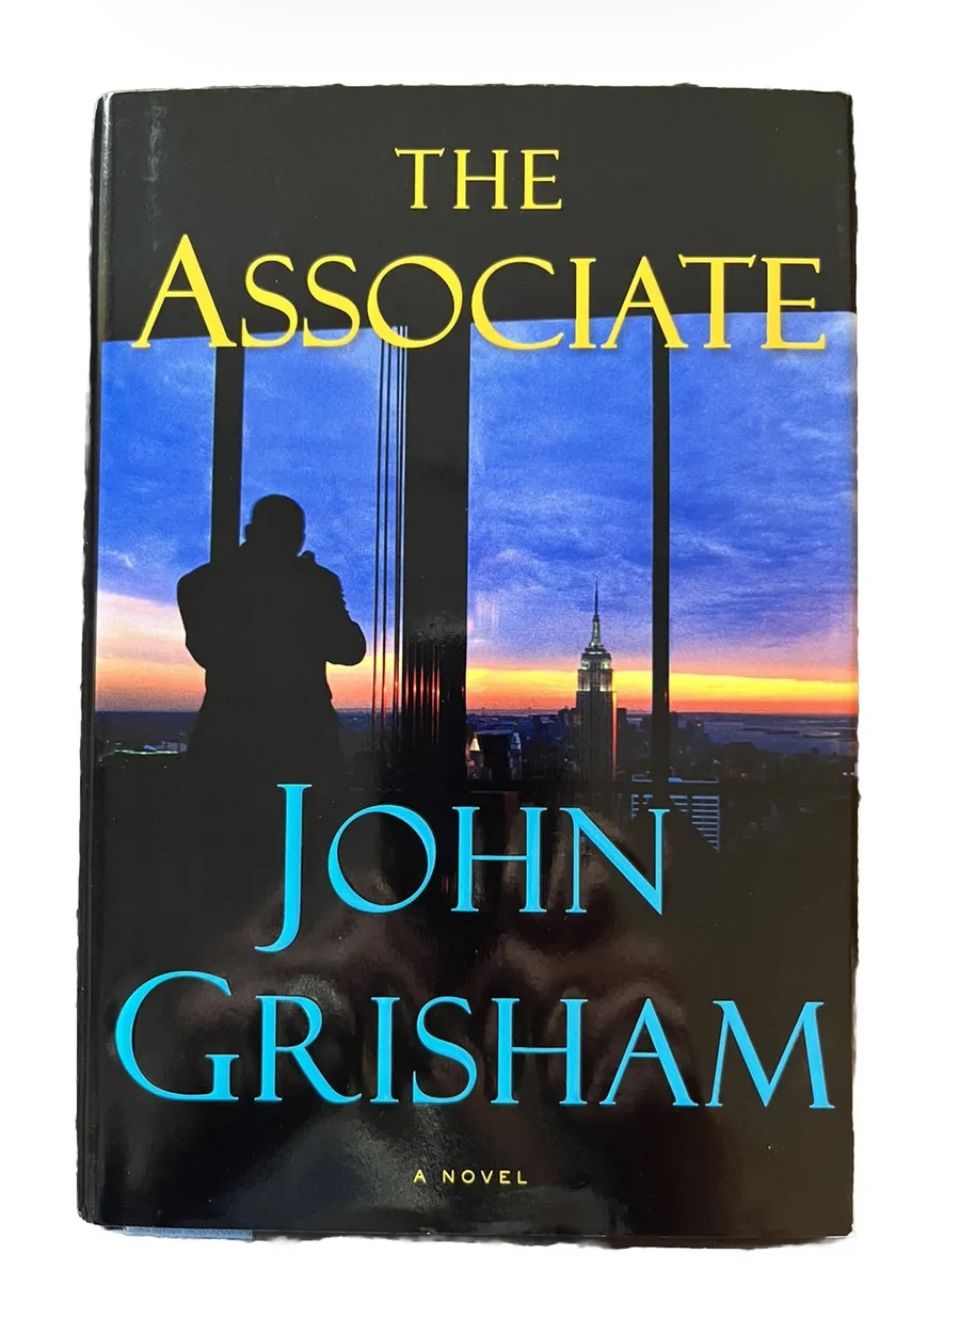 The Associate (Limited Edition) by John Grisham (2009, Hardcover, Limited) Book